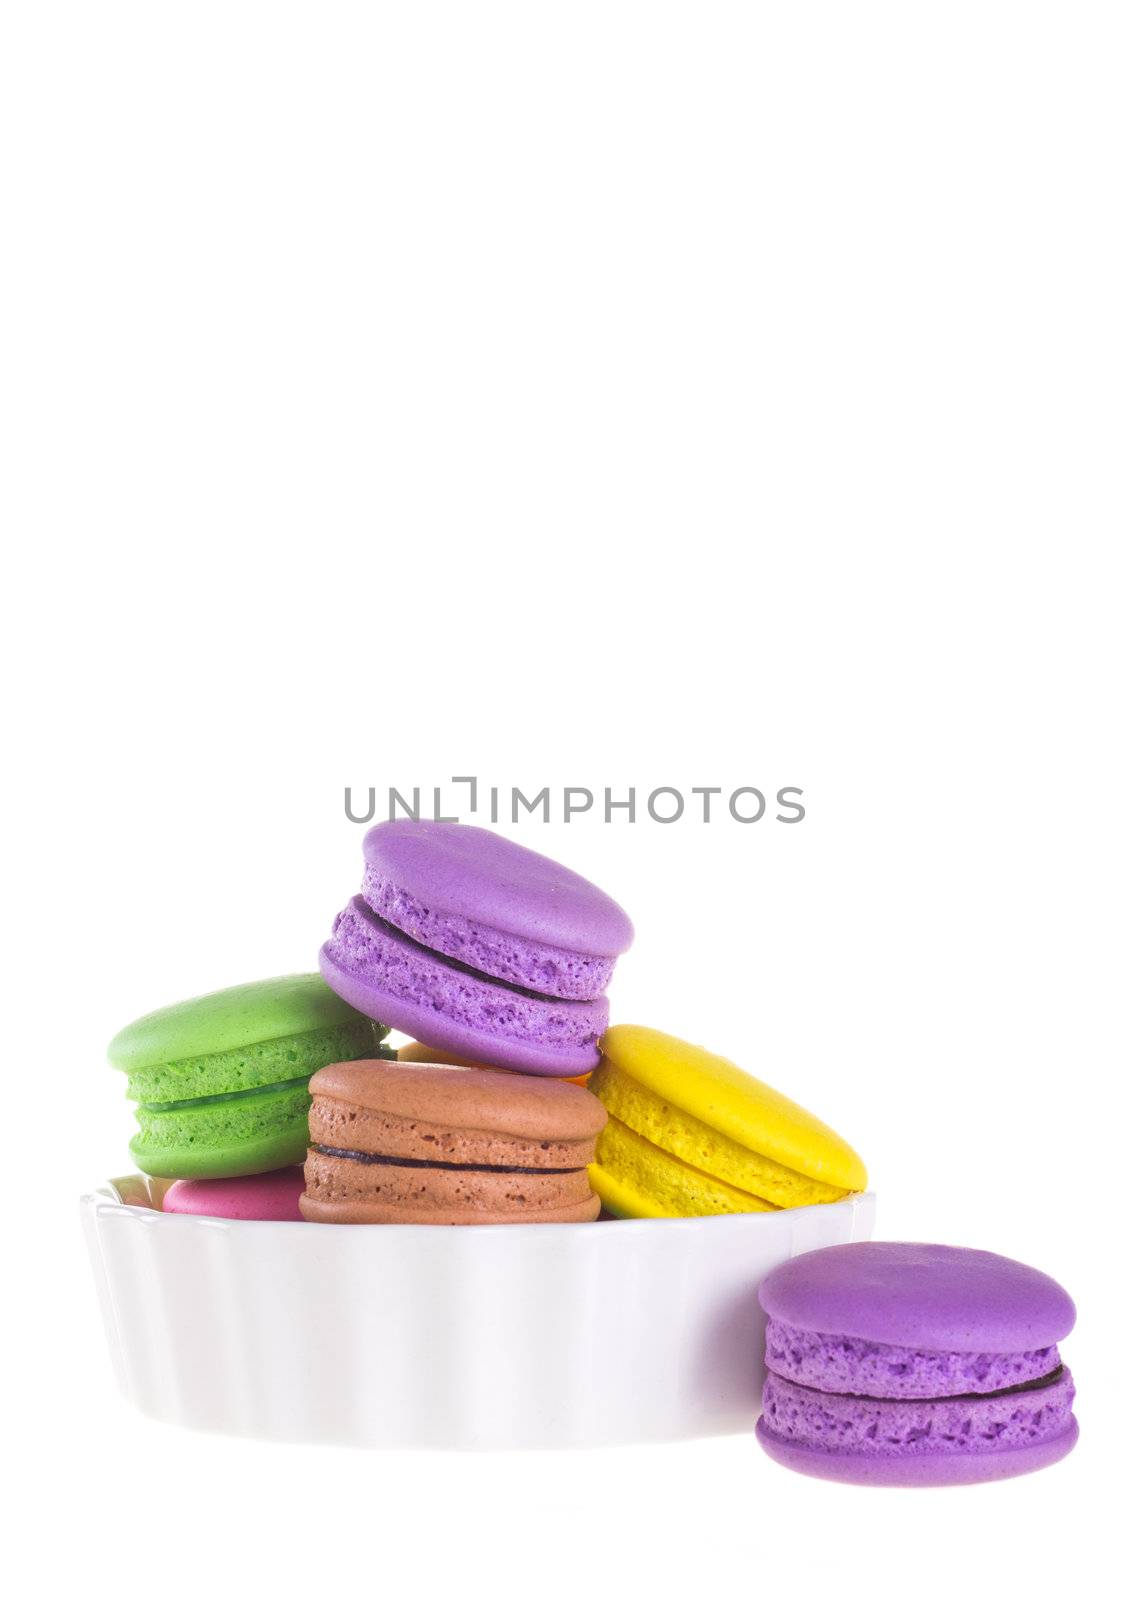 macarons by tehcheesiong